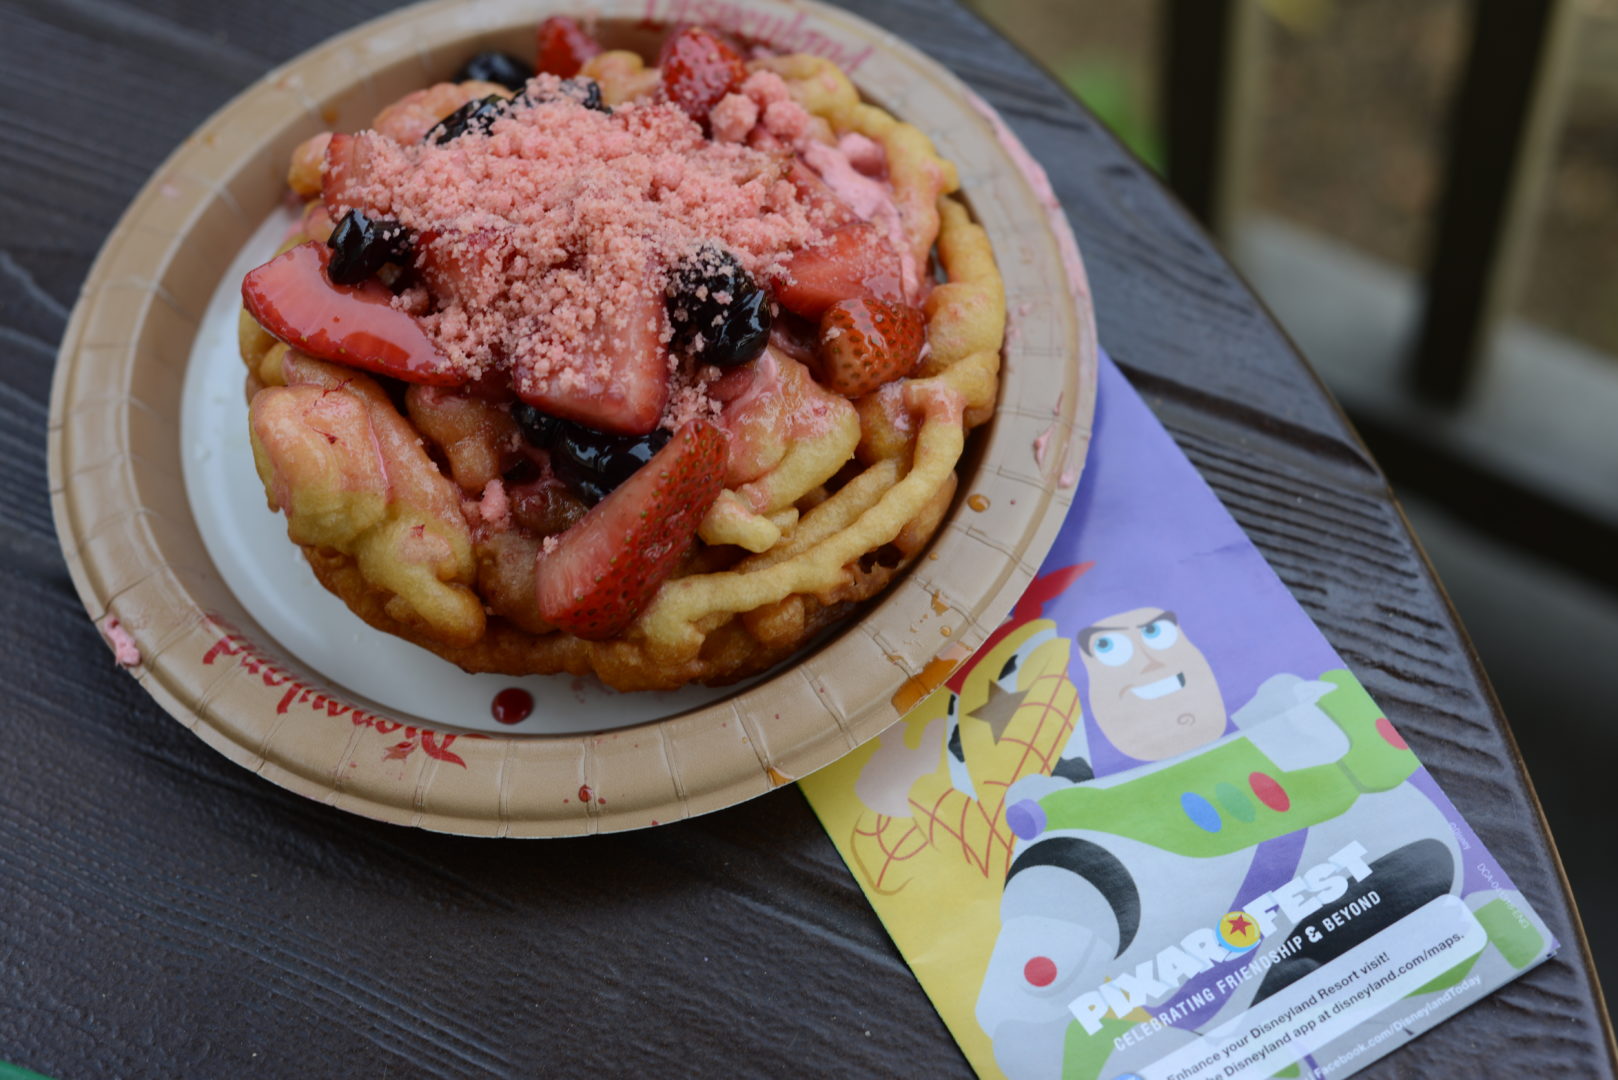 Lots-O Strawberry & Blueberry Funnel Cake with a Disneyland/Pixar Fest Park Map